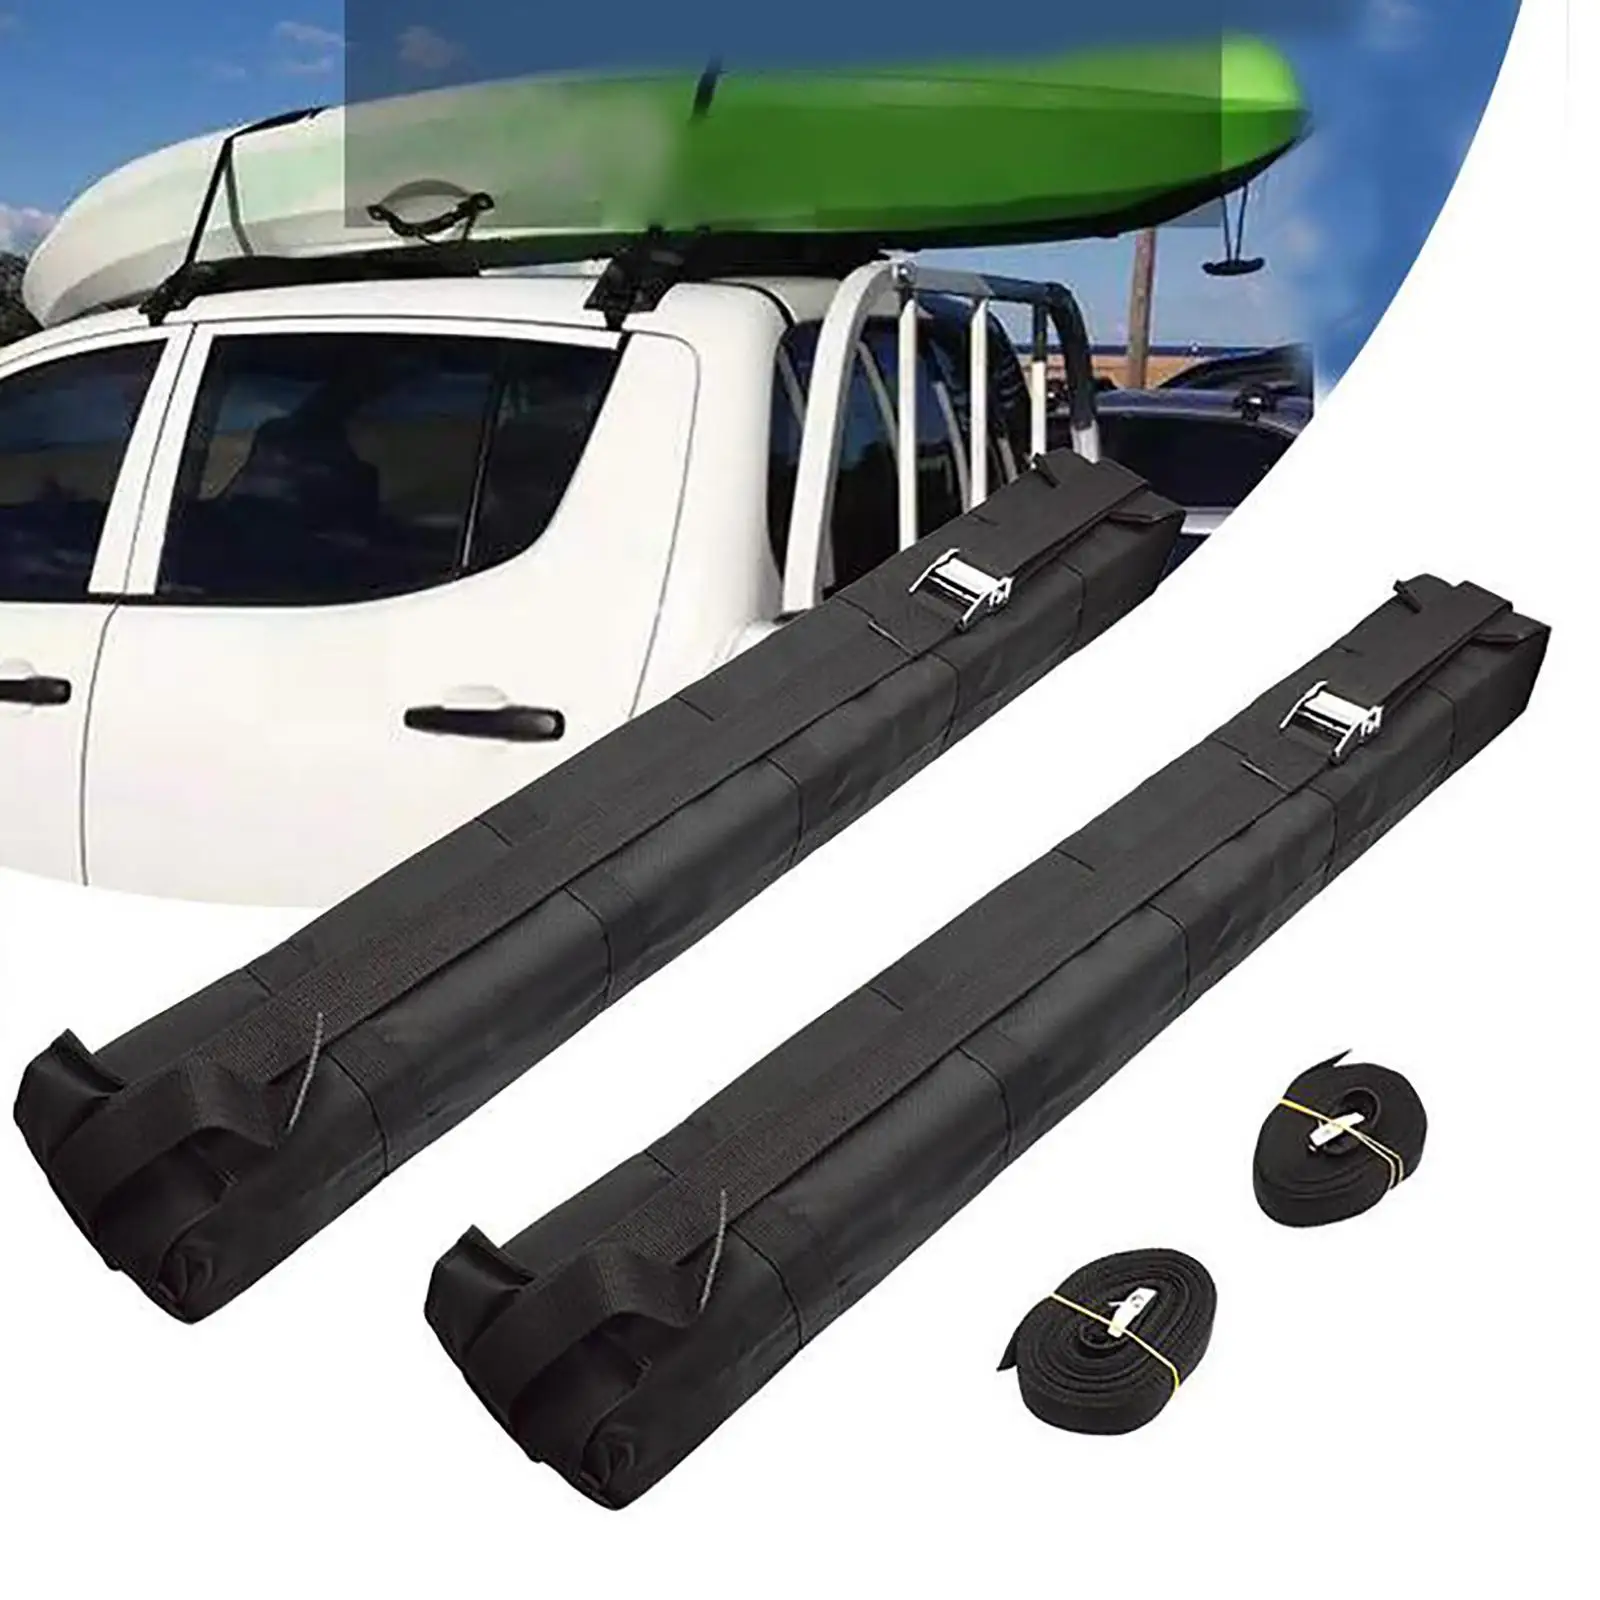 Roof Racks Universal Car Soft Roof Bars Kayak Roof Rack Durable Oxford Cloth Roof Rack Pad Carrier Heavy Duty Tie Down Straps